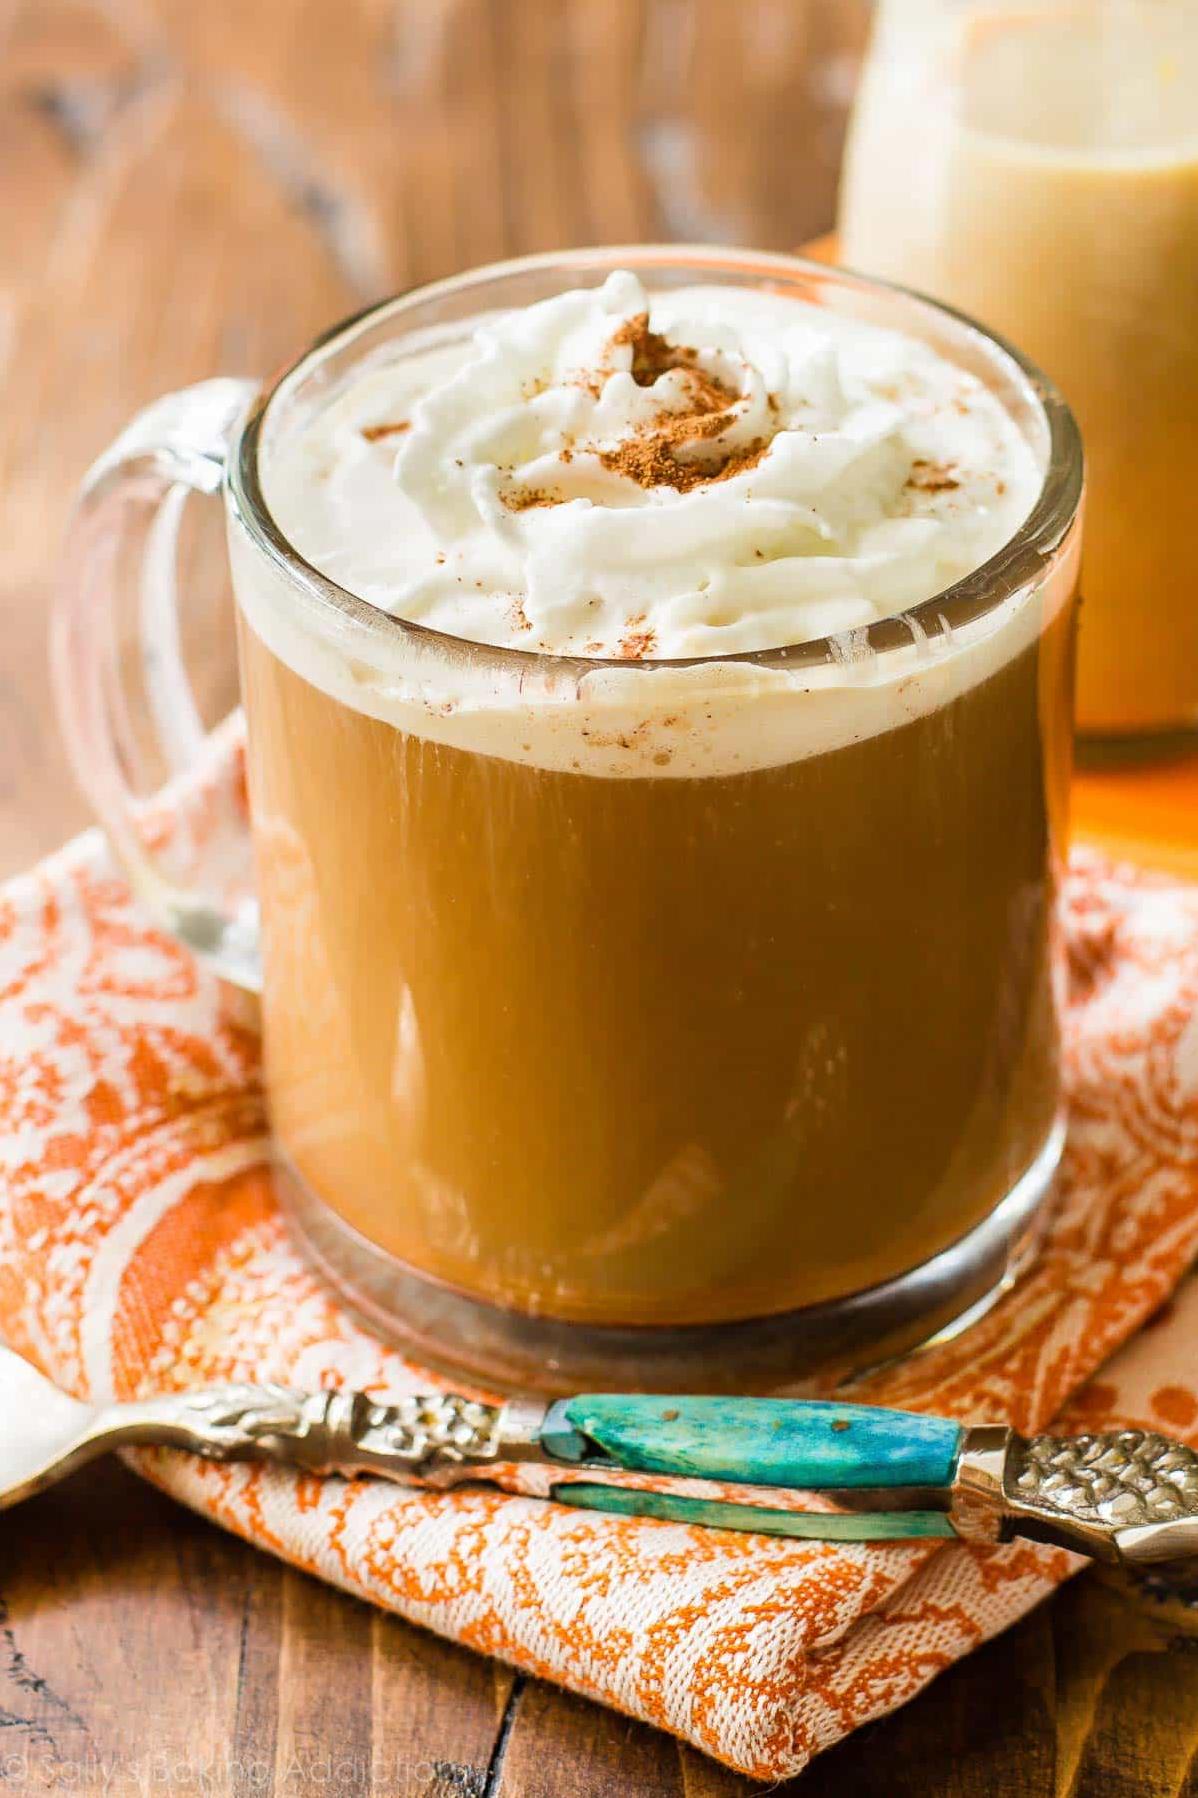  Start your day off on the right foot with a cup of creamy pumpkin coffee